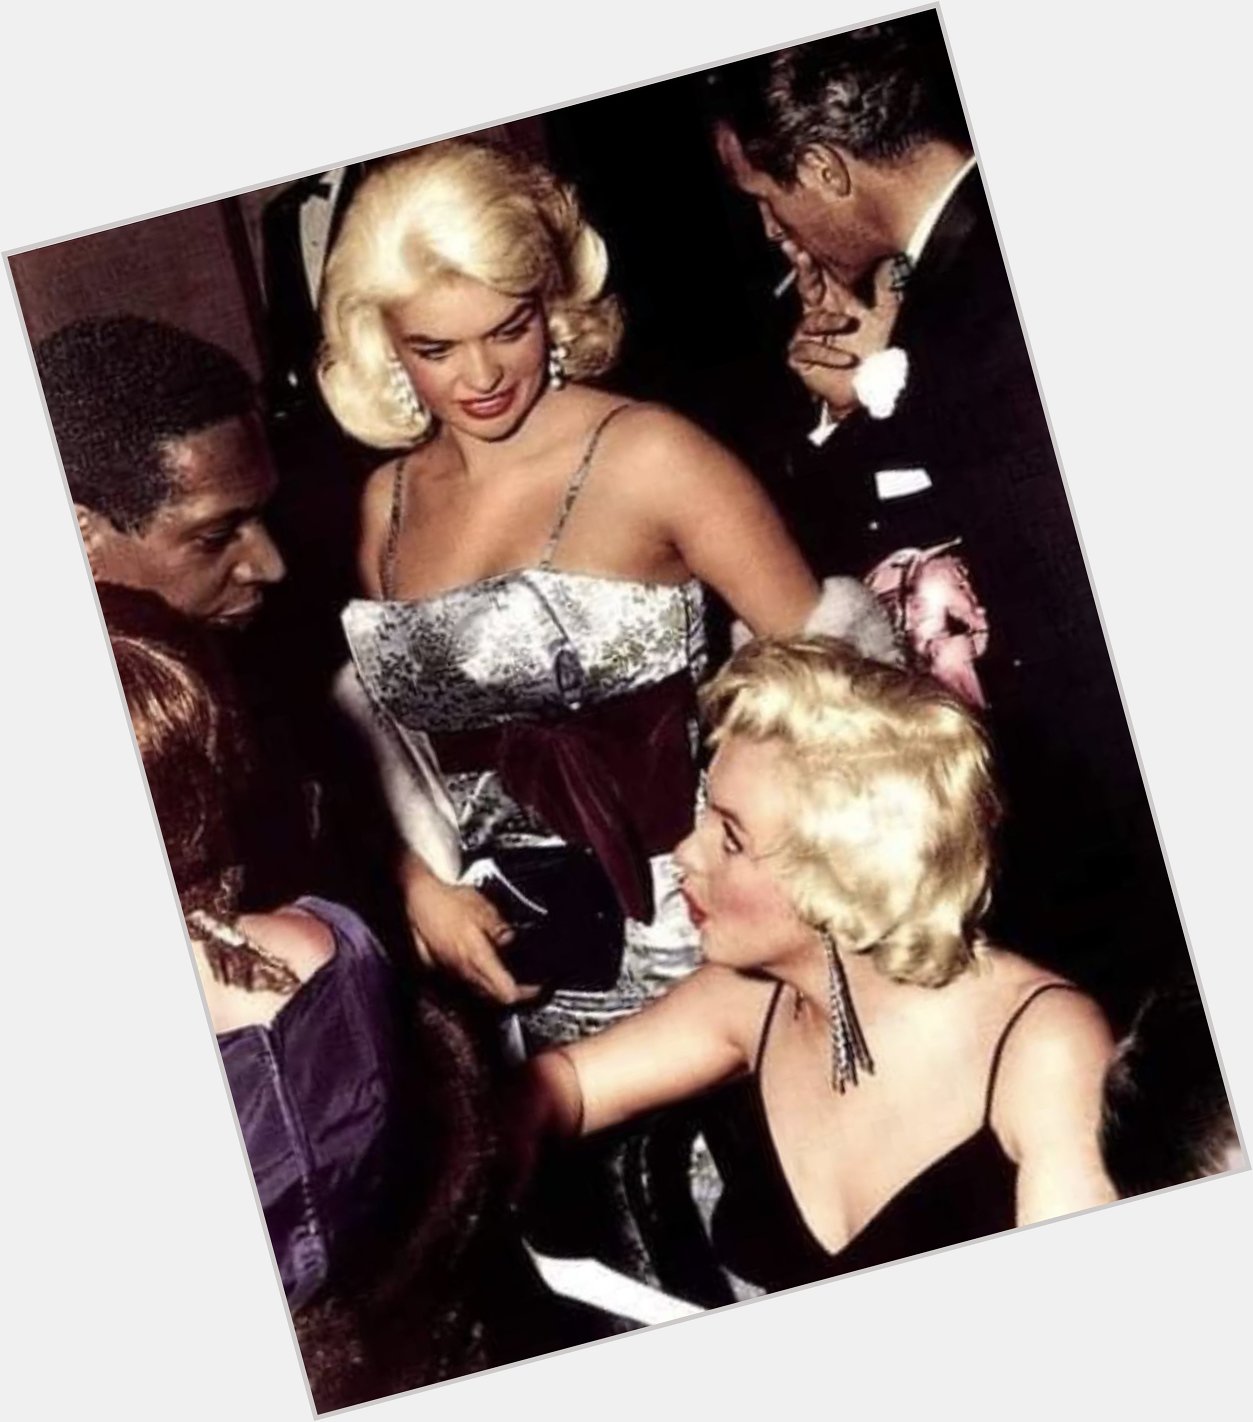    AND HAPPY 88th BDAY JAYNE MANSFIELD   